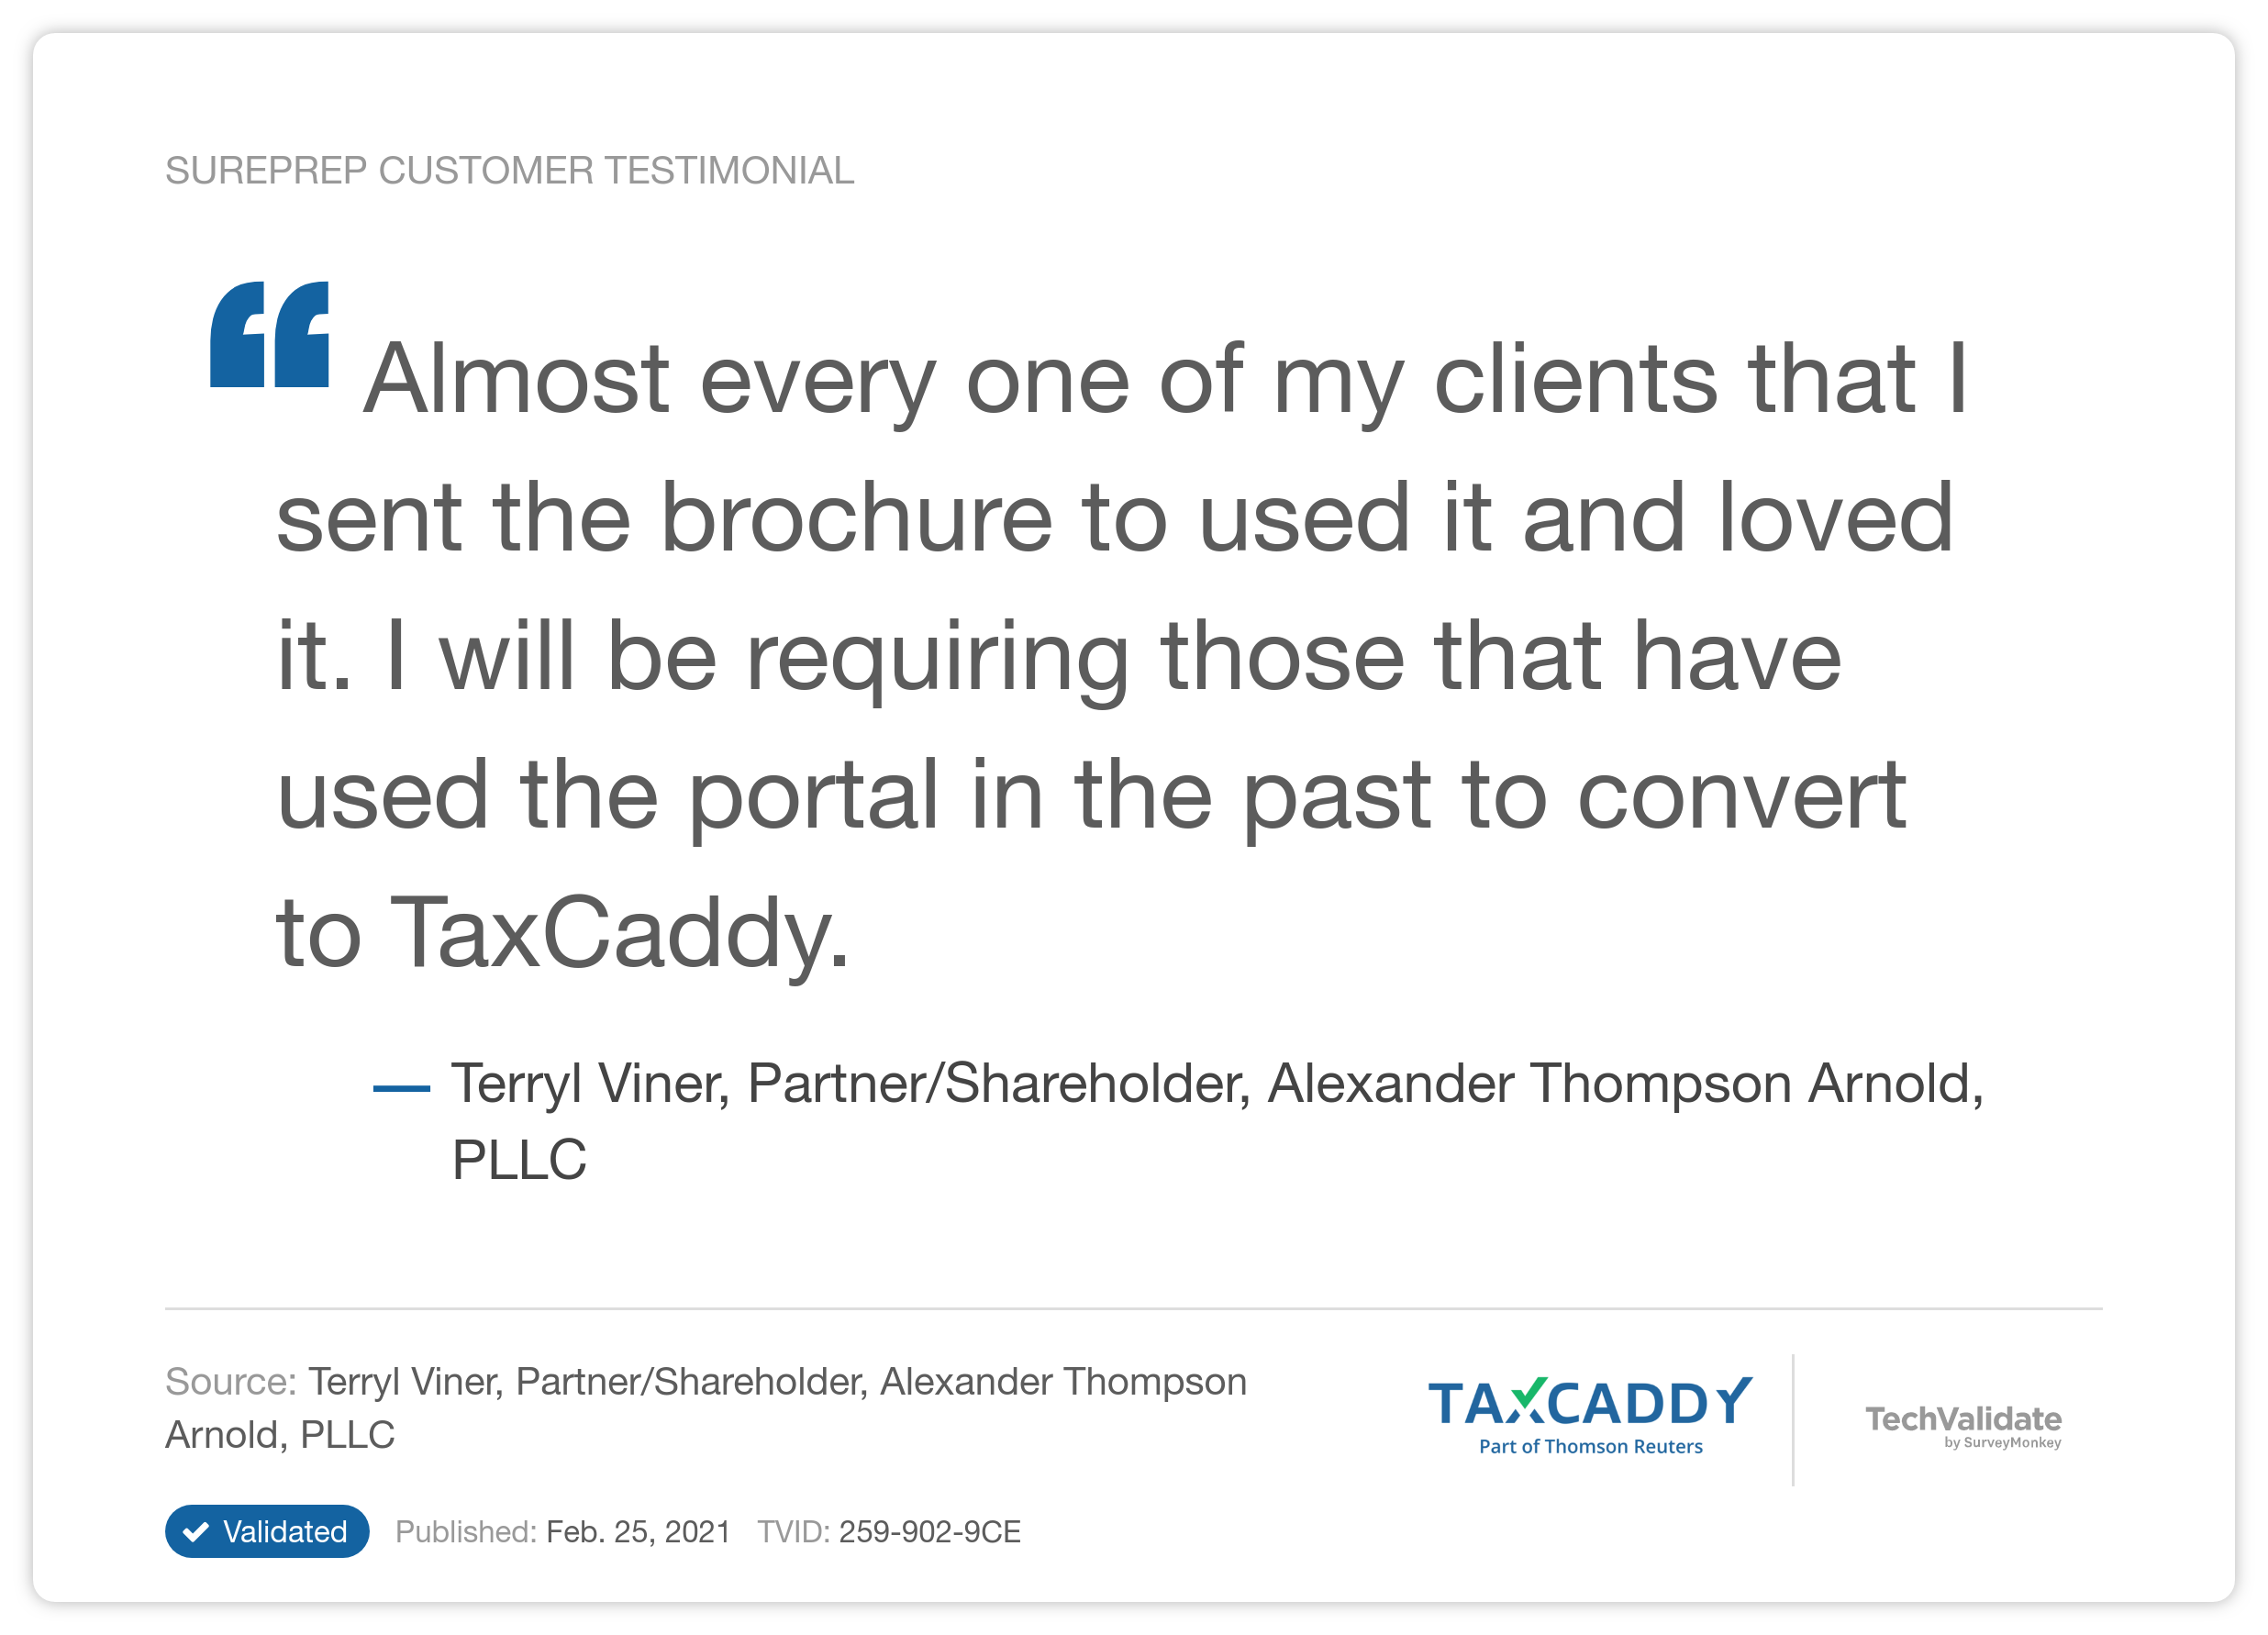 TaxCaddy TechValidate Tax Professional Quote